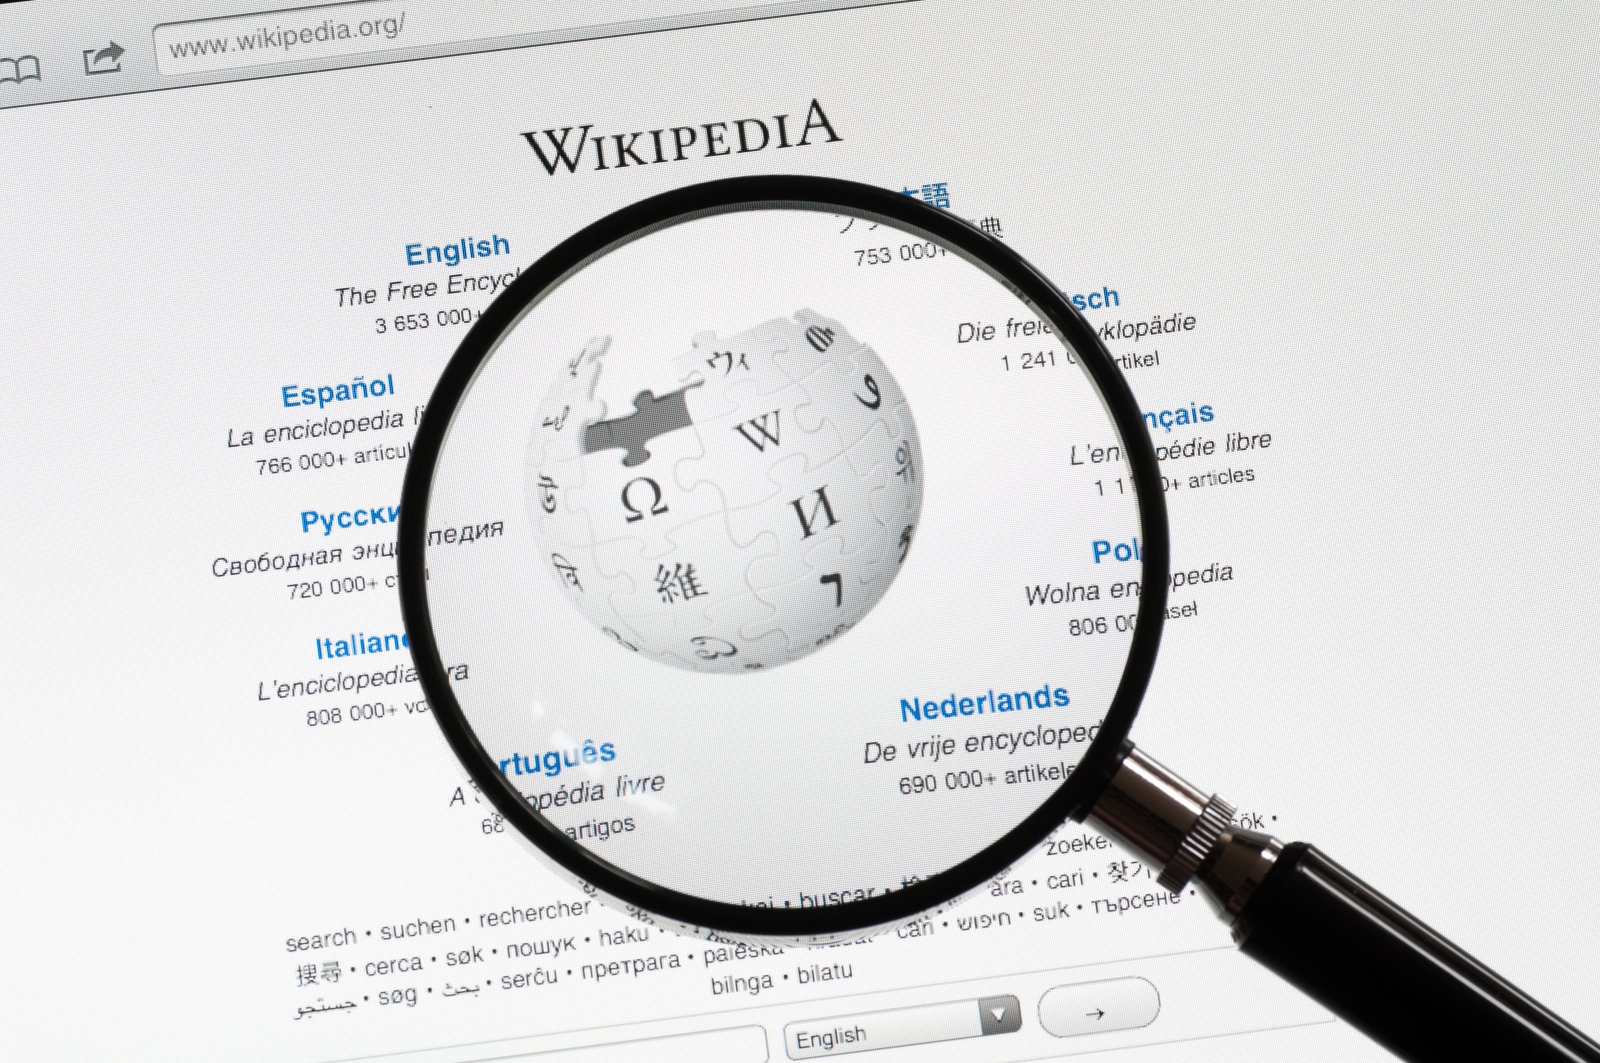 A security expert built an unofficial Wikipedia for the dark web